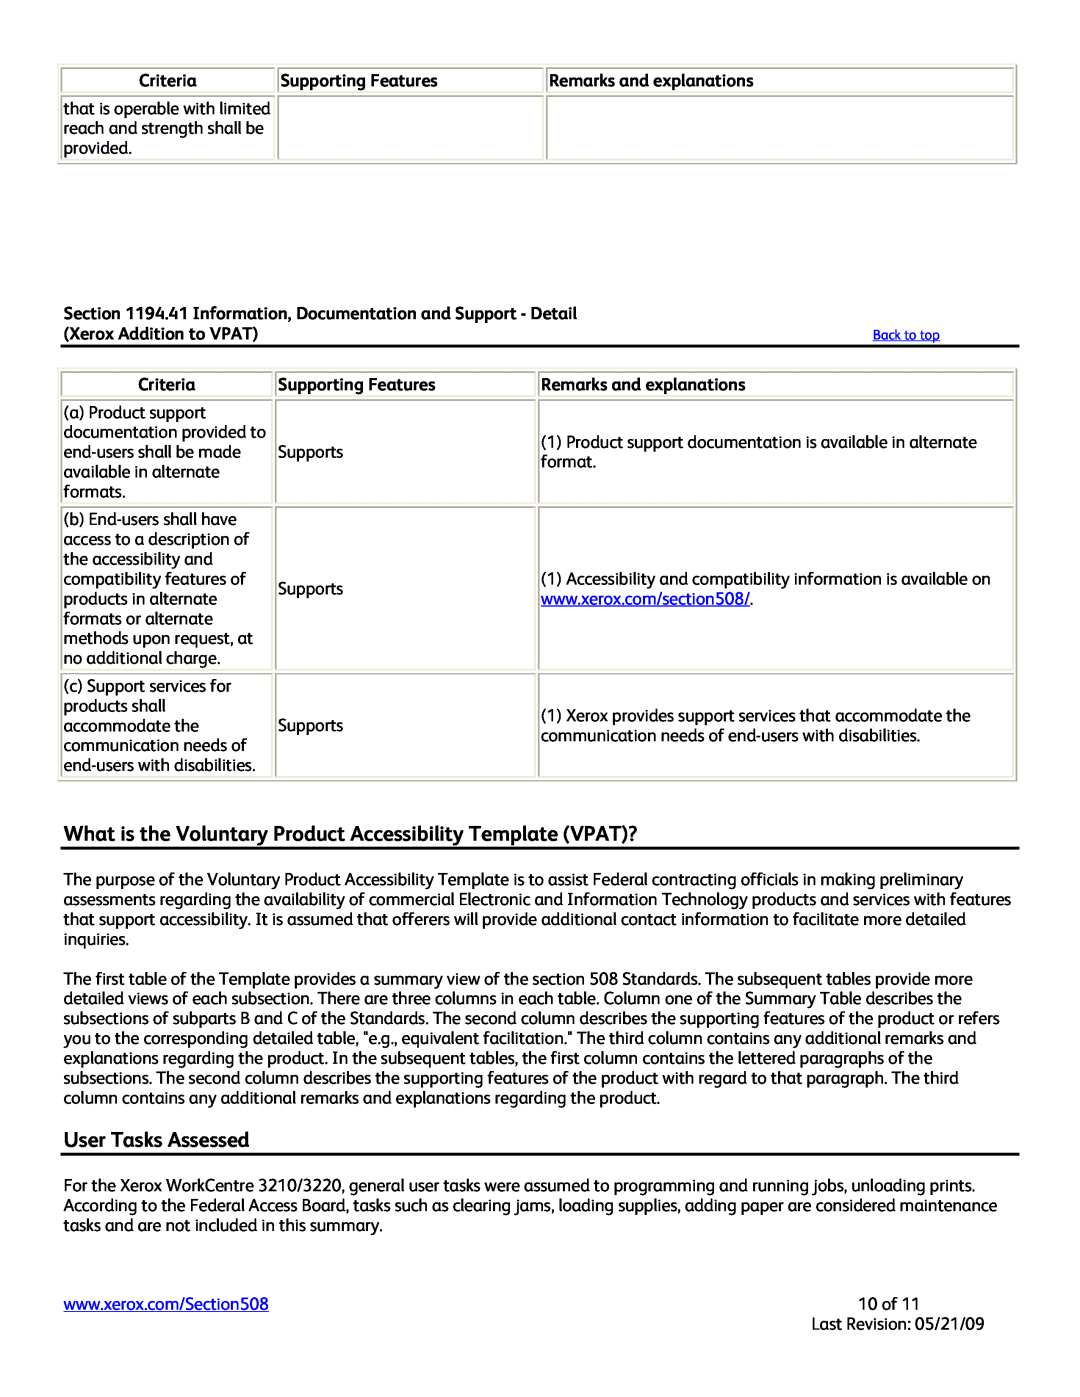 Xerox 3210 manual What is the Voluntary Product Accessibility Template VPAT?, User Tasks Assessed, Xerox Addition to VPAT 